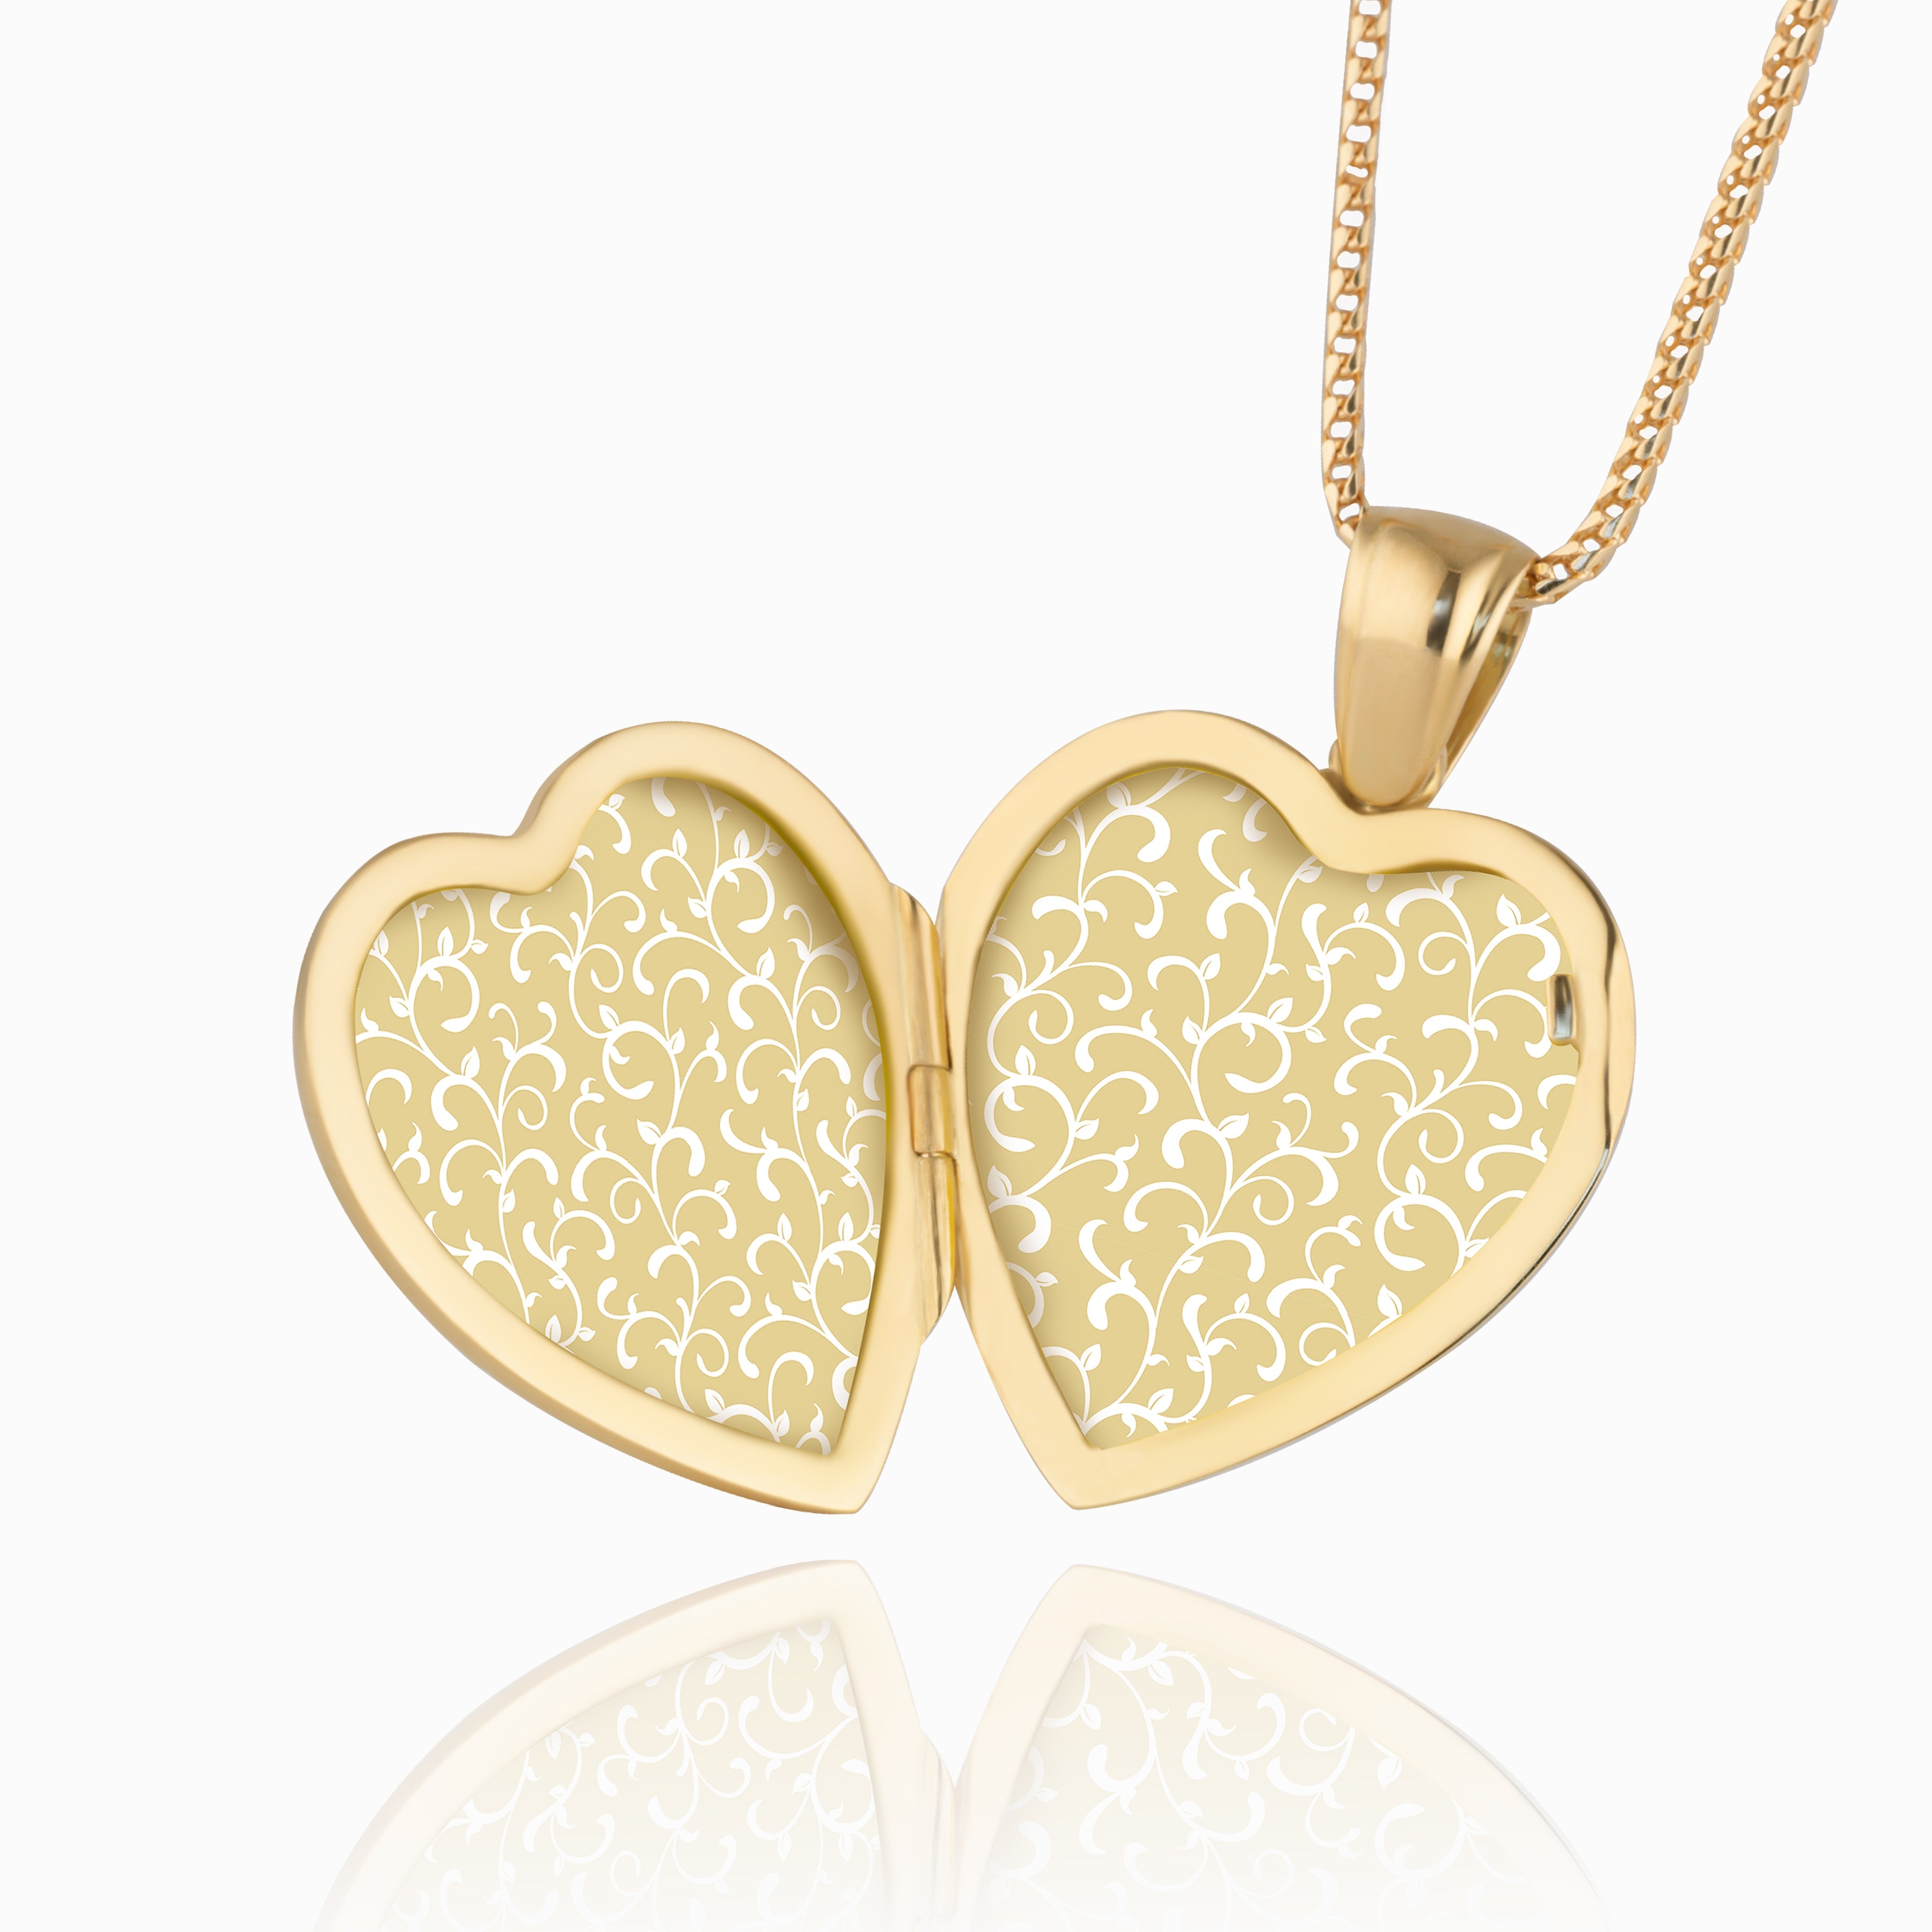 Product title: 18 ct Classic Floral Diamond Gold Locket 22 mm, product type: Locket